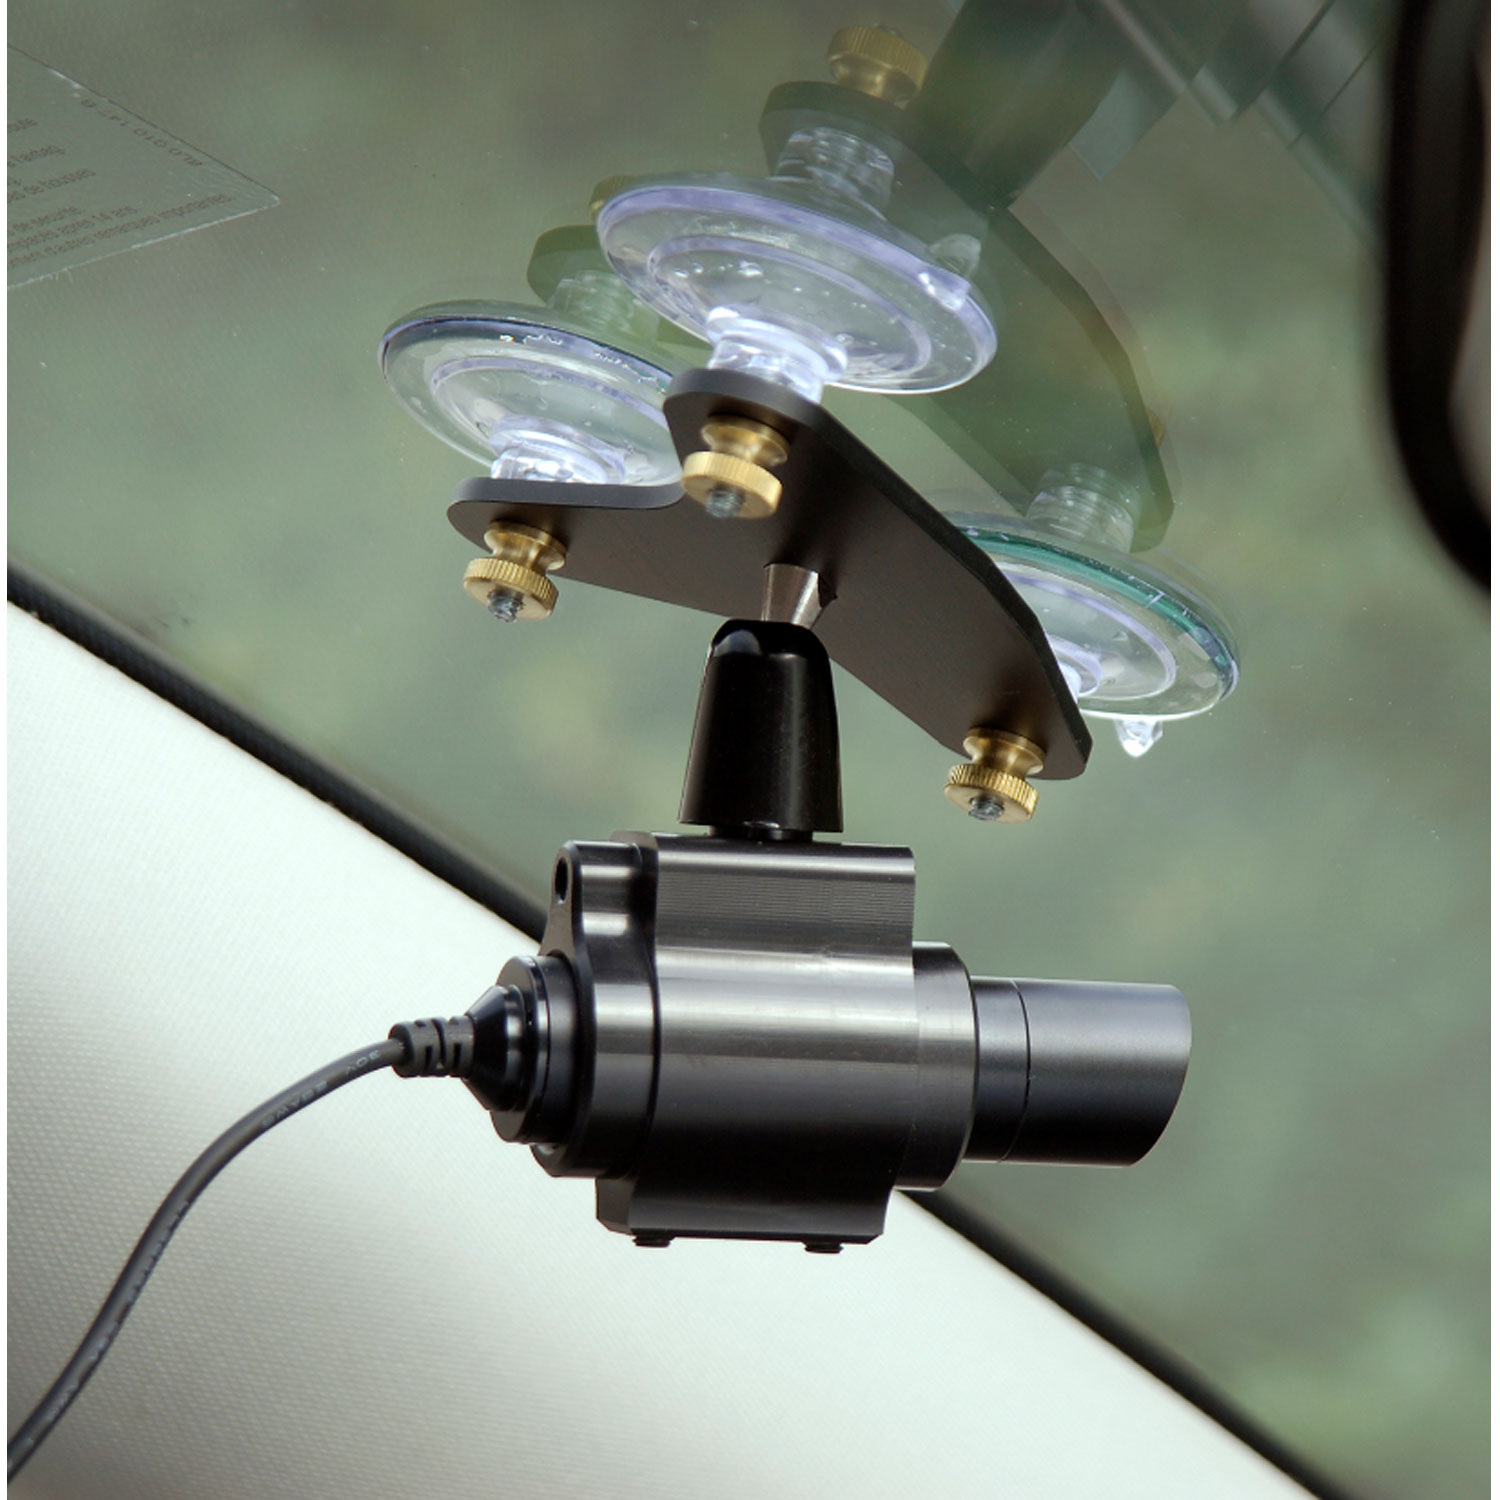 Camera Mount Multi-Directional Suction Cup